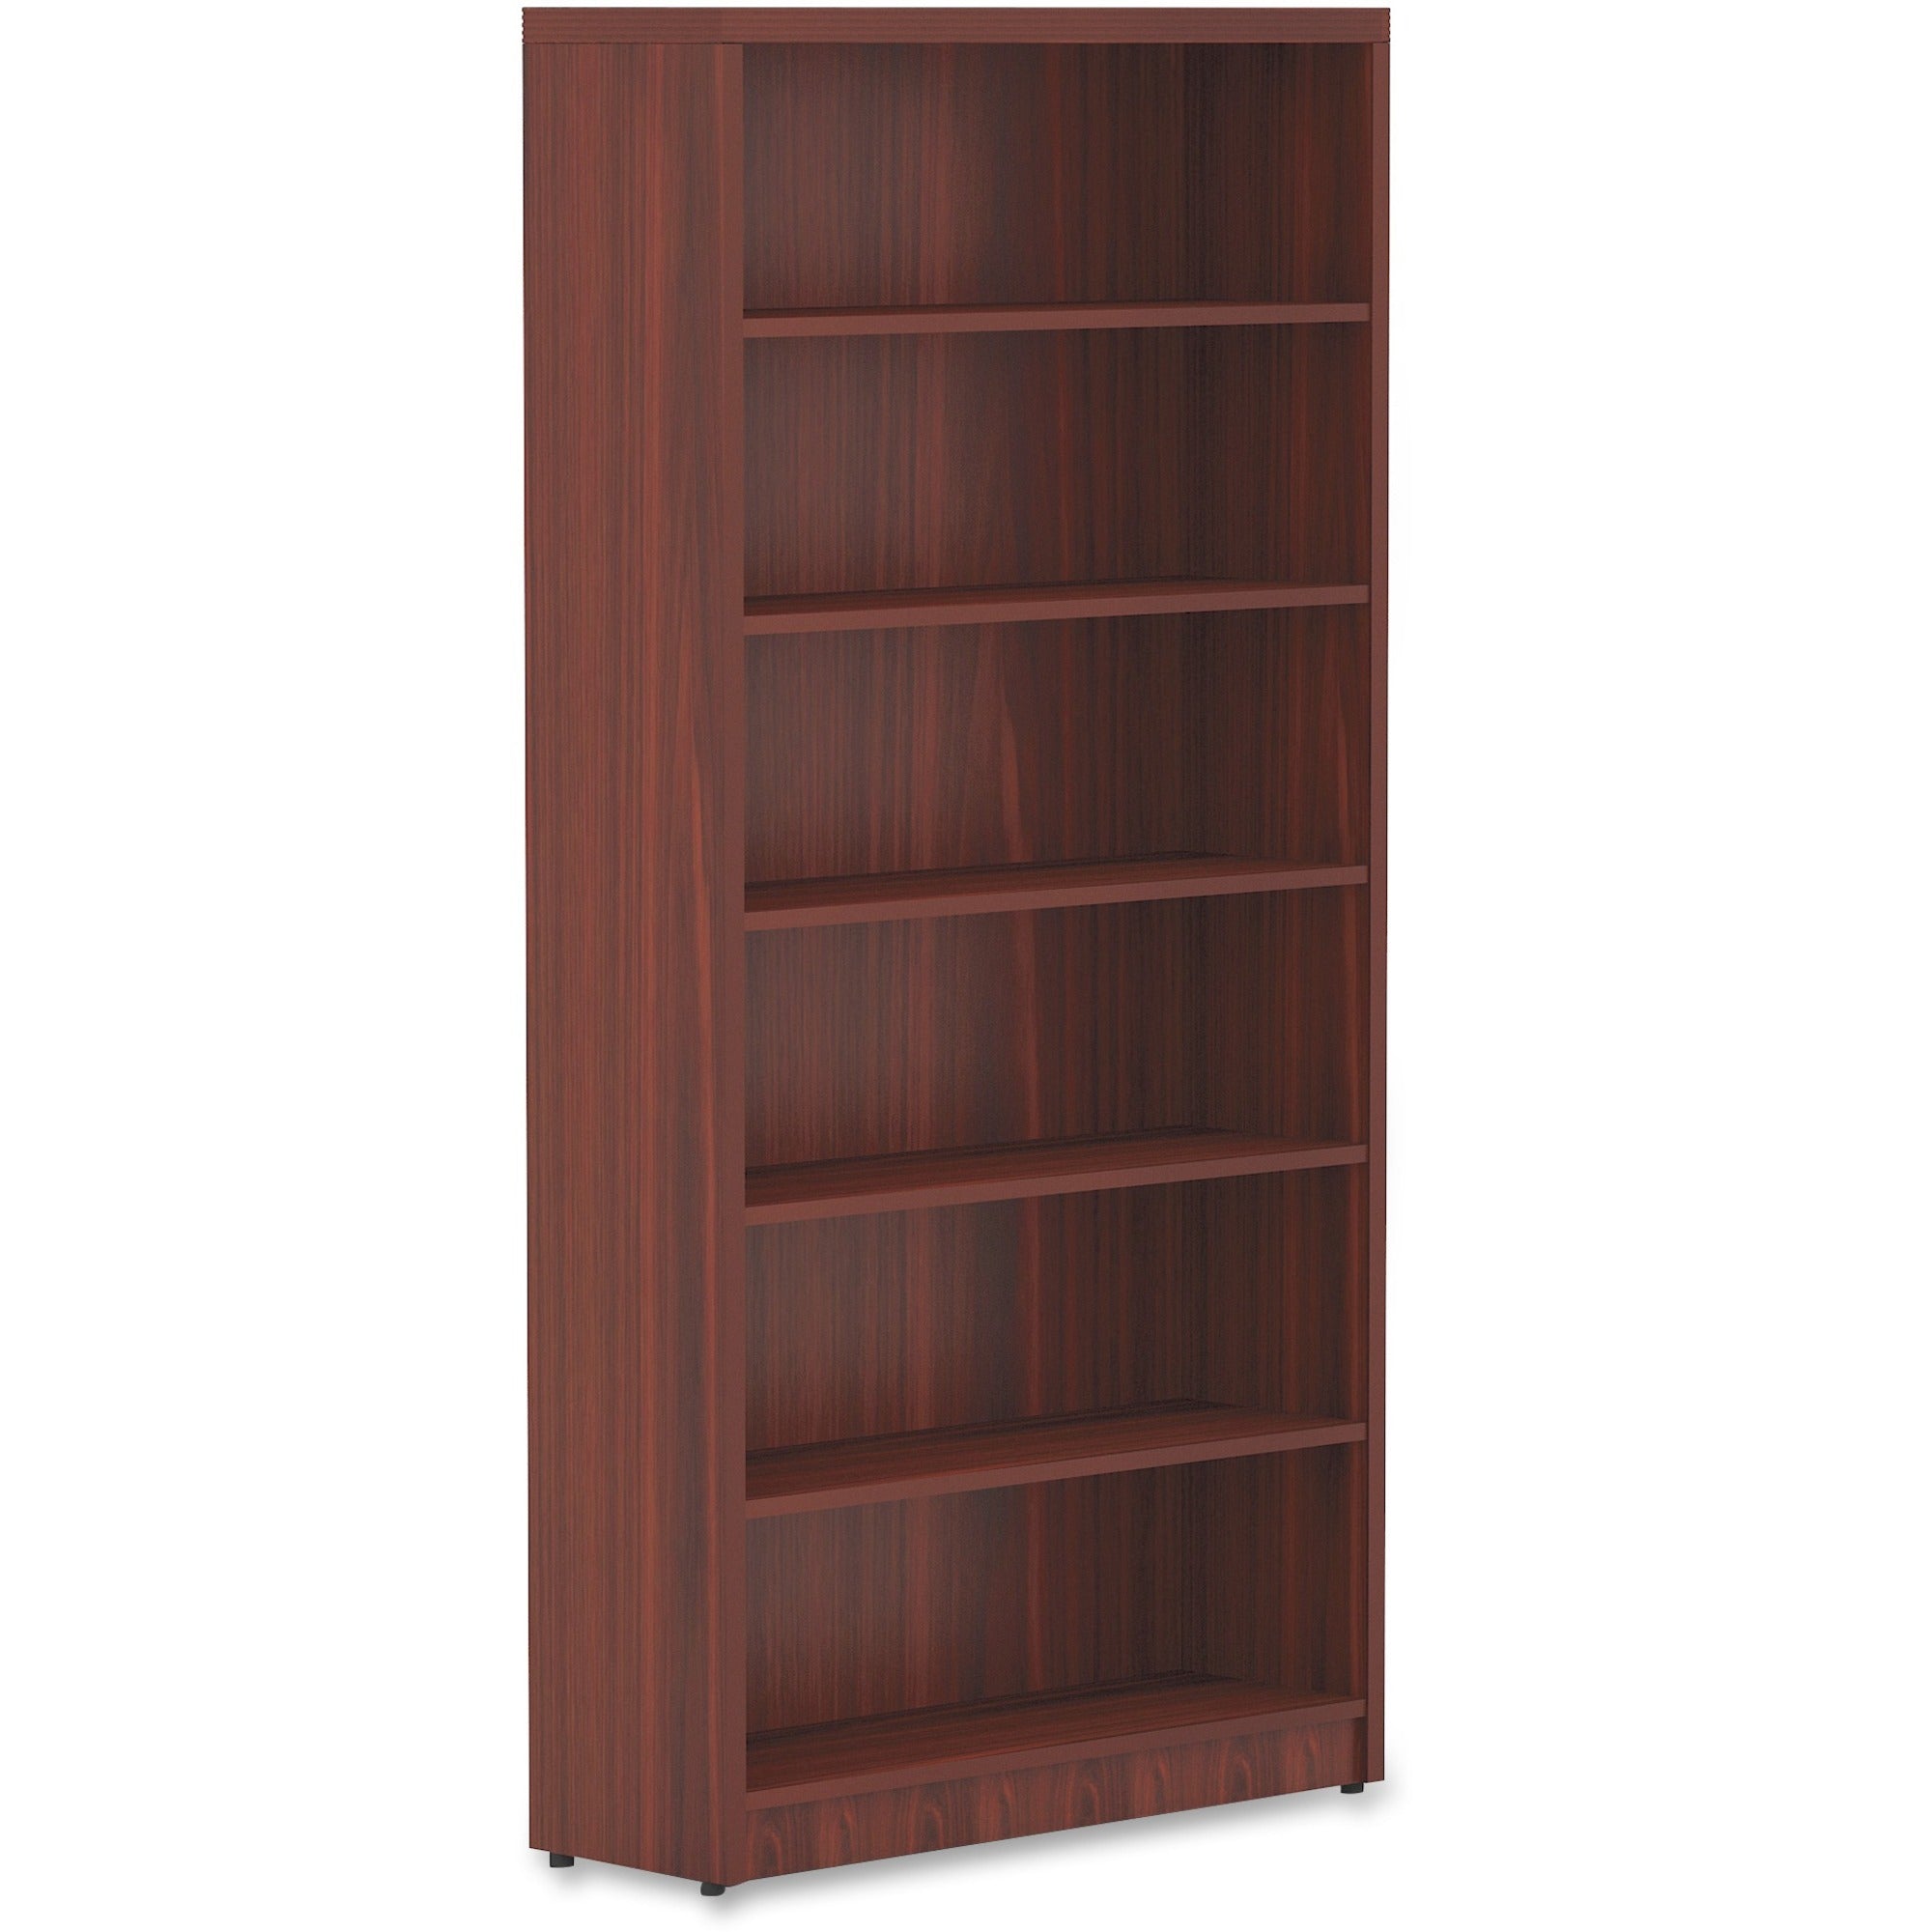 Lorell Chateau Series Bookshelf - 1.5" Top, 36" x 11.6"72.5" Bookshelf - 6 Shelve(s) - Reeded Edge - Material: P2 Particleboard - Durable, Sturdy - For Office, Book - 